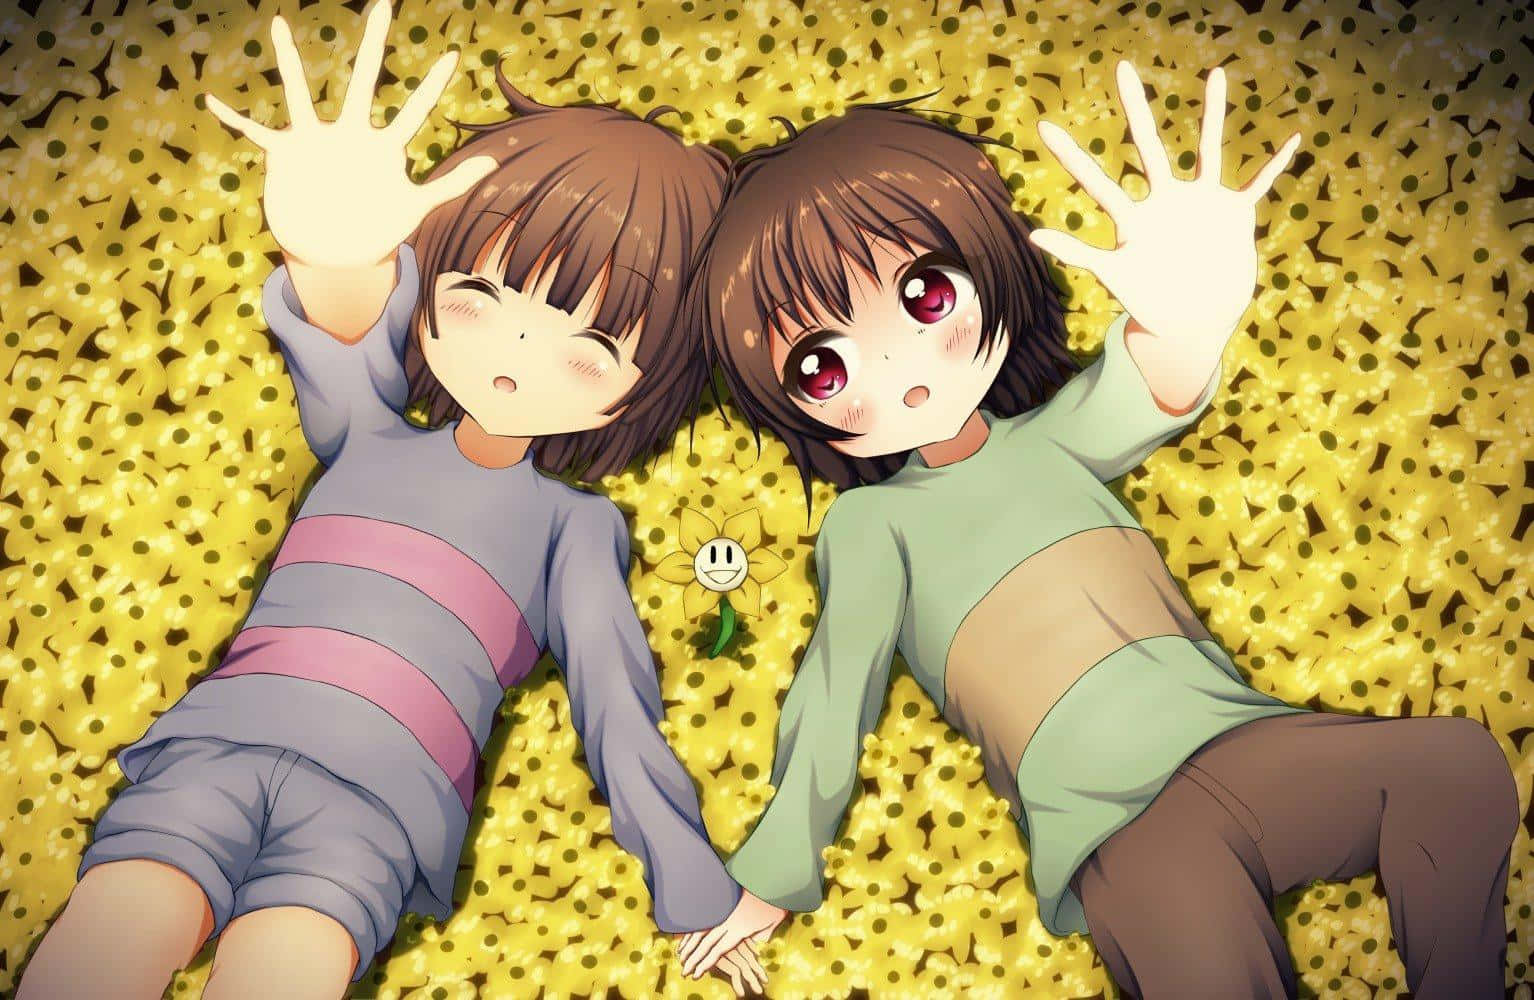 Join Frisk in the magical world of Undertale Wallpaper